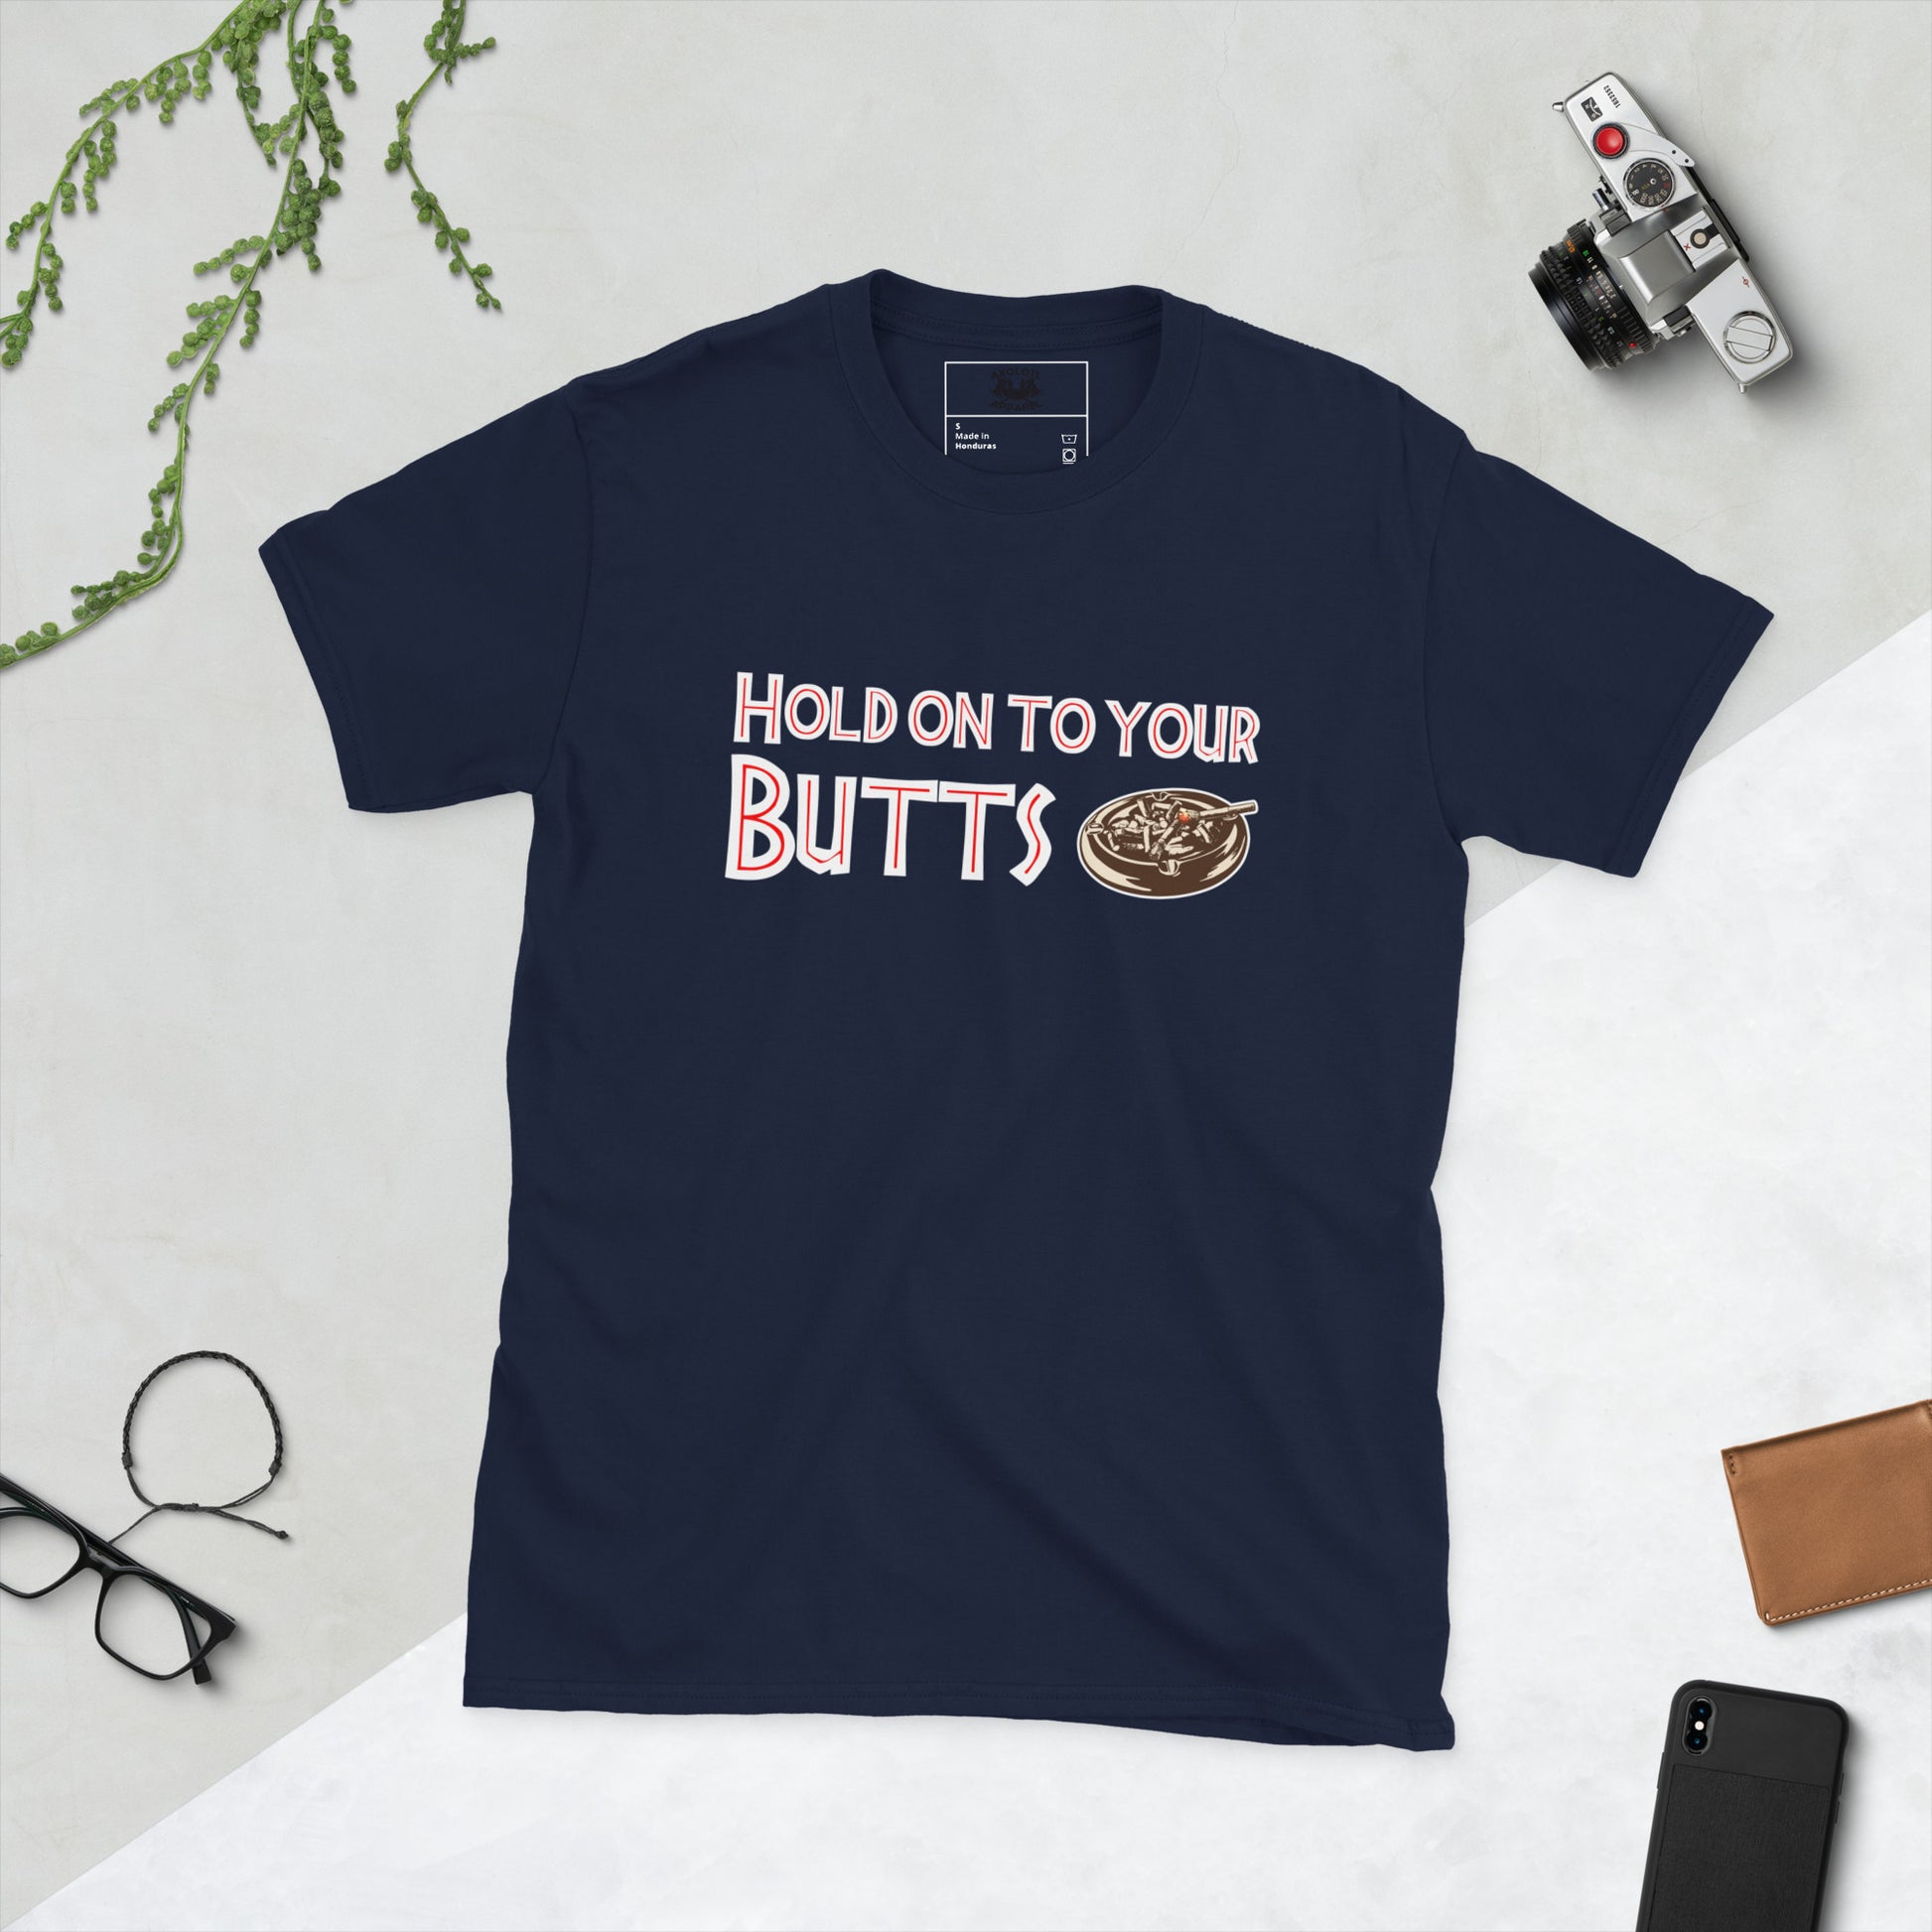 Hold on to your butts short-sleeve unisex t-shirt navy flat